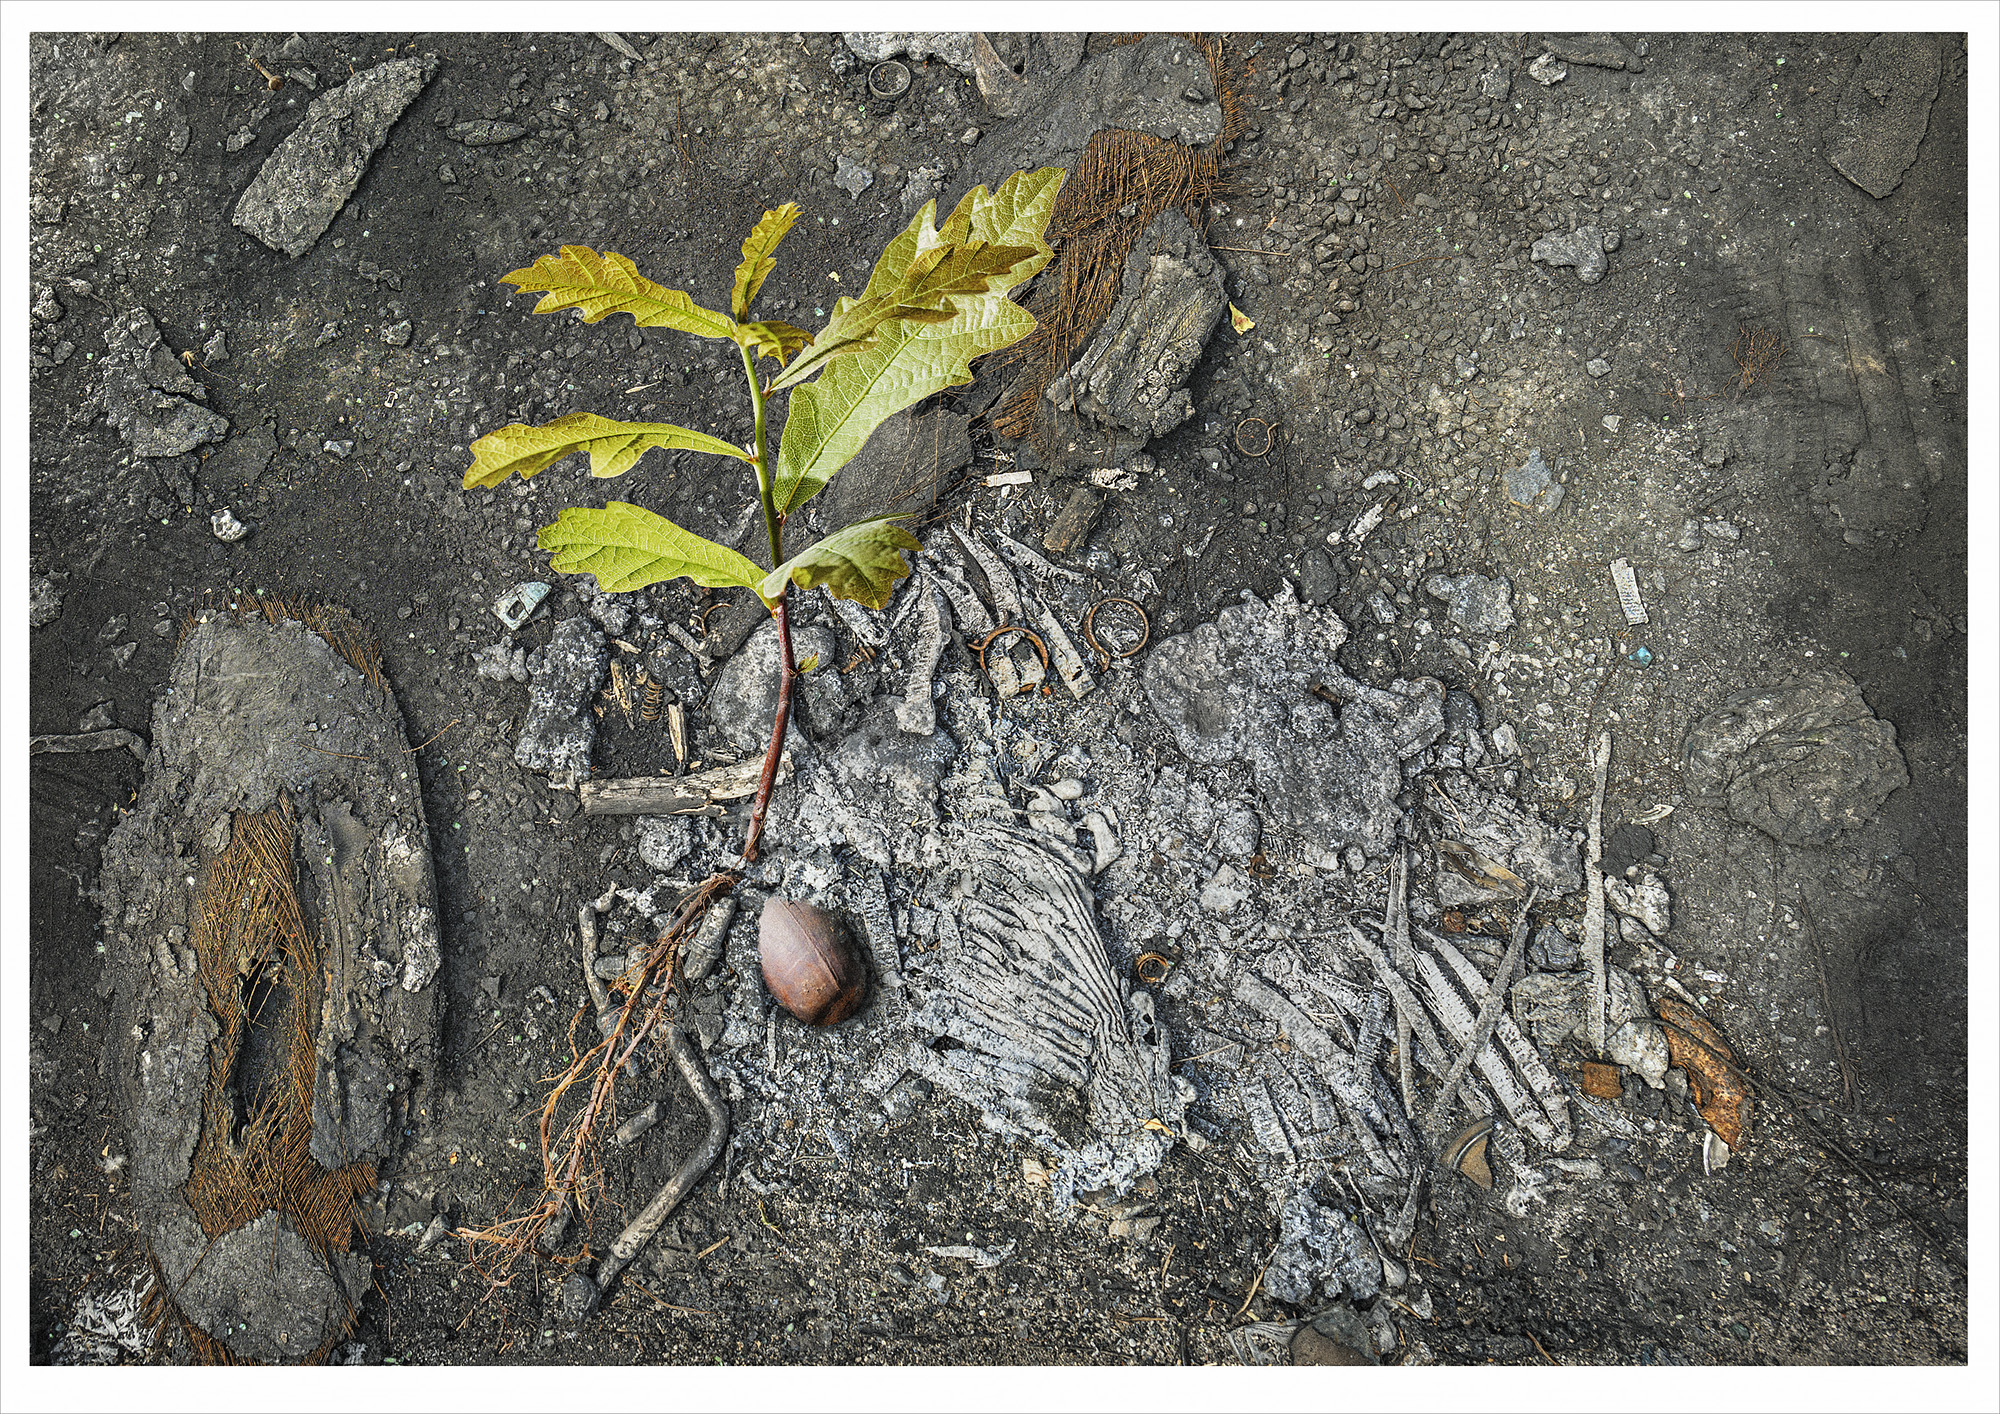 An Oak tree sapling with it's original acorn appears to be growing out of a grey burnt debris stewn area